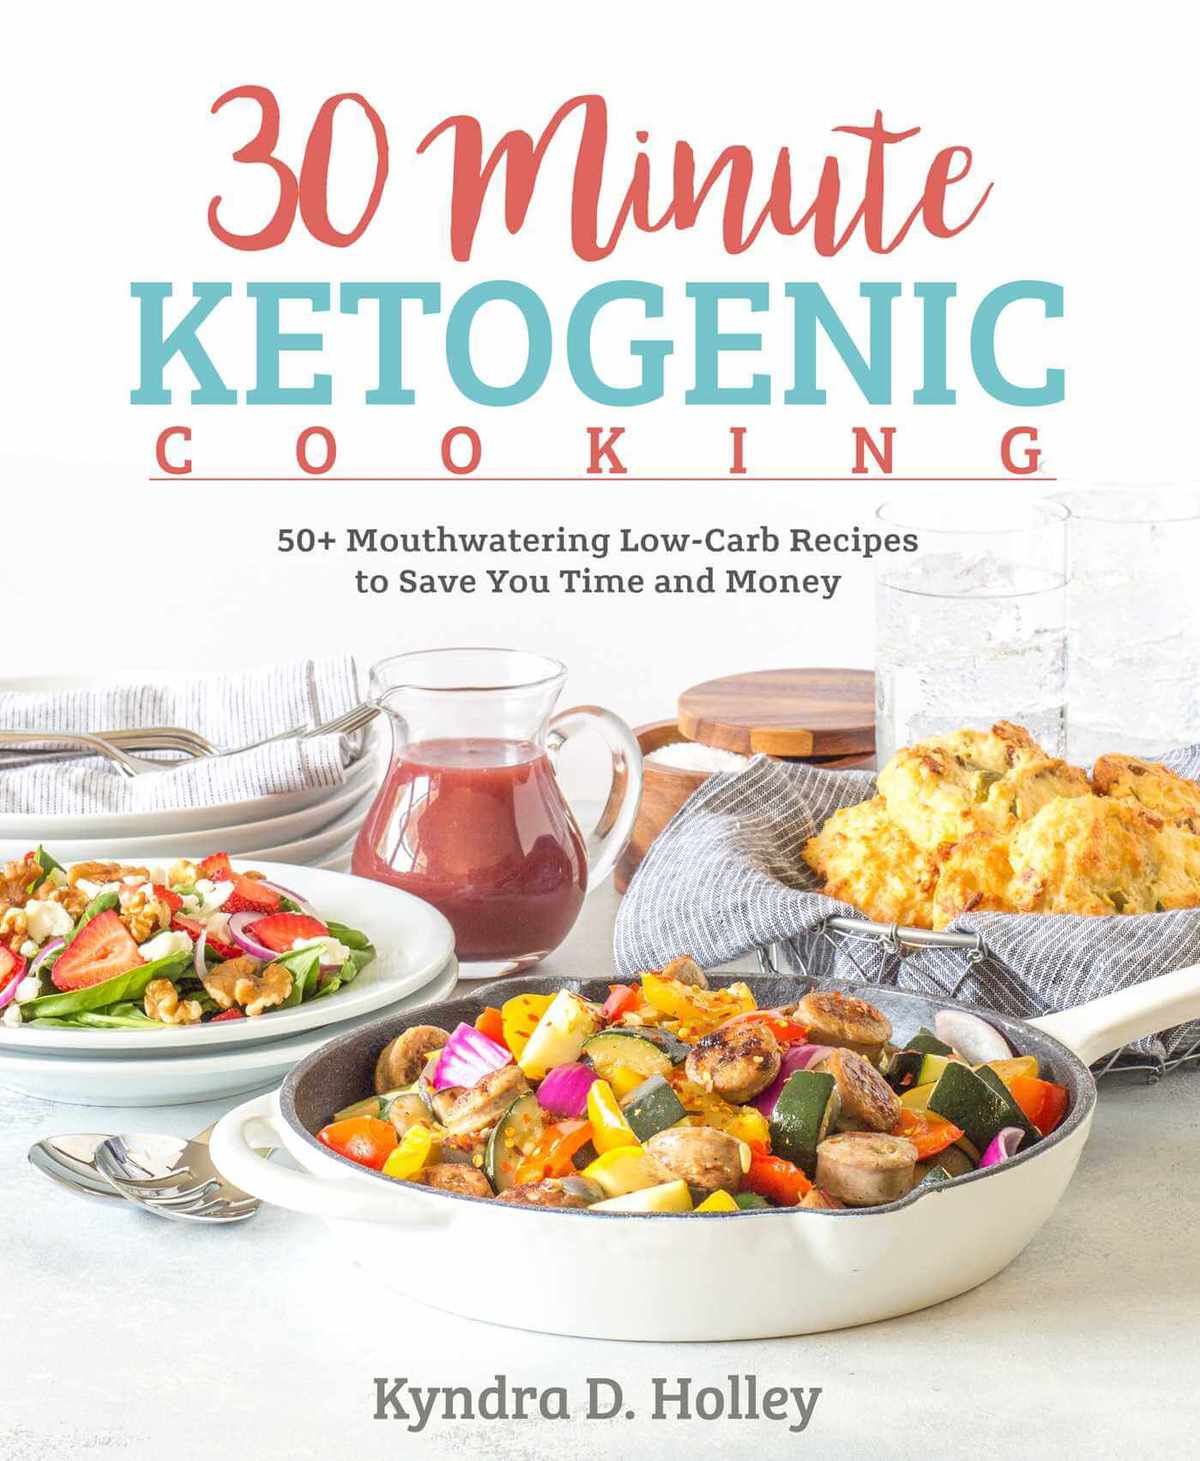 Top 10 Keto Books of 2018 - 30 Minute Ketogenic Cooking